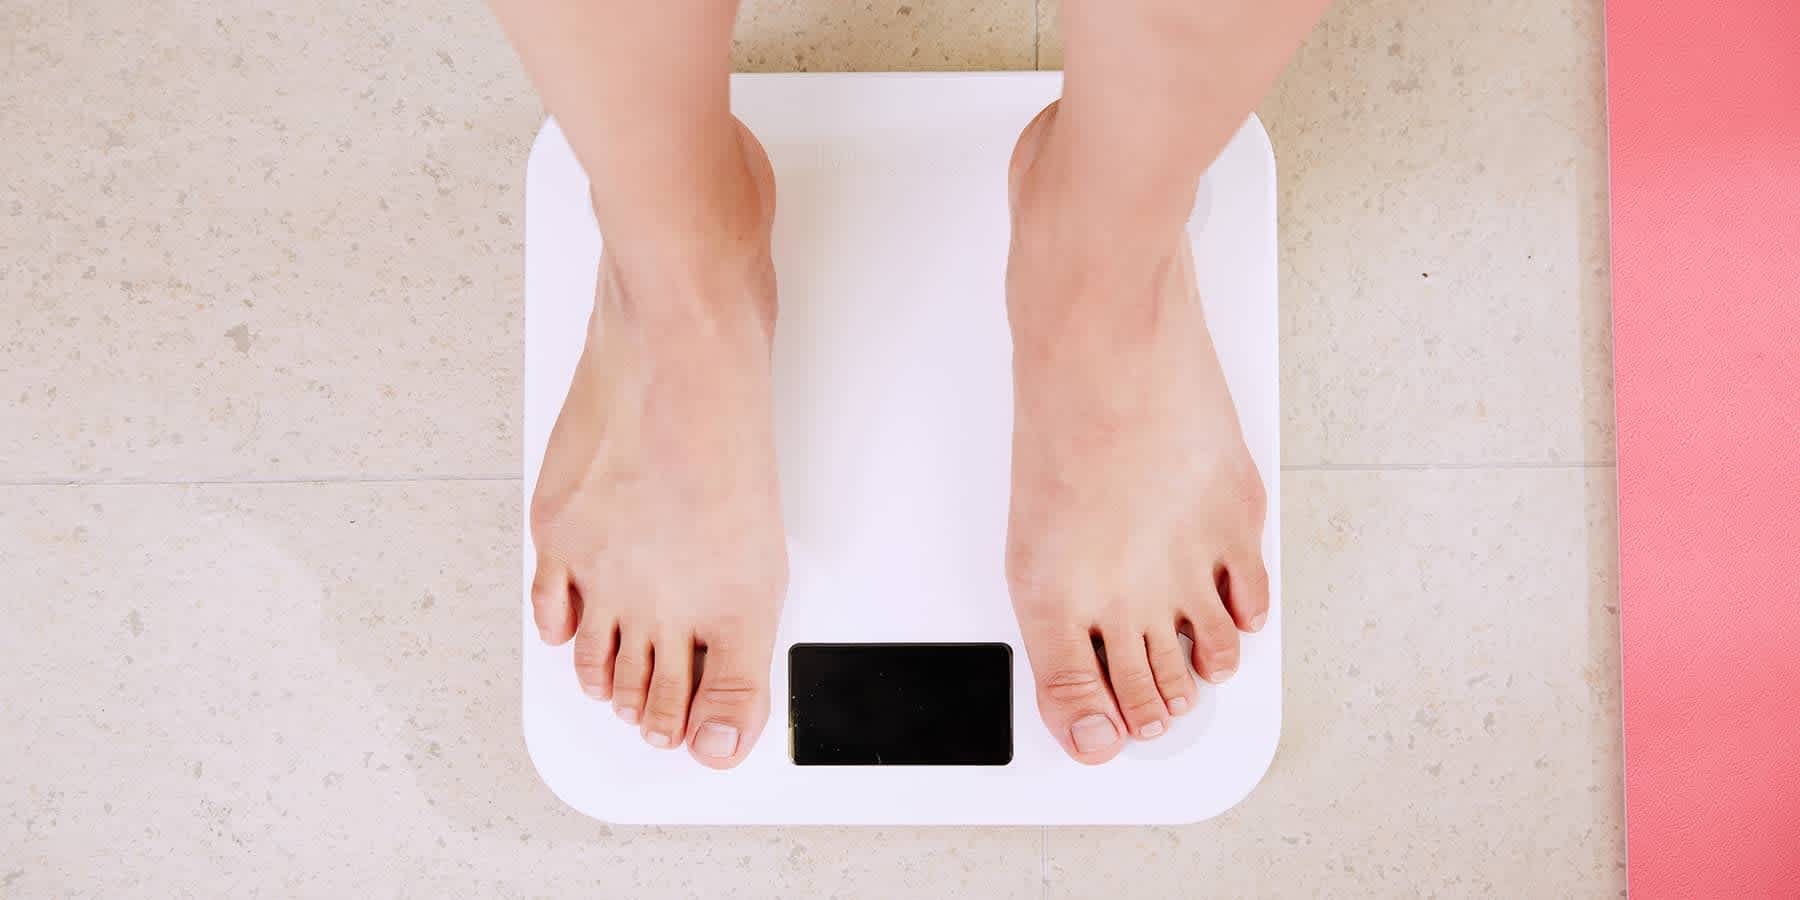 Person stepping on bathroom scale while wondering if Trulicity is a GLP-1